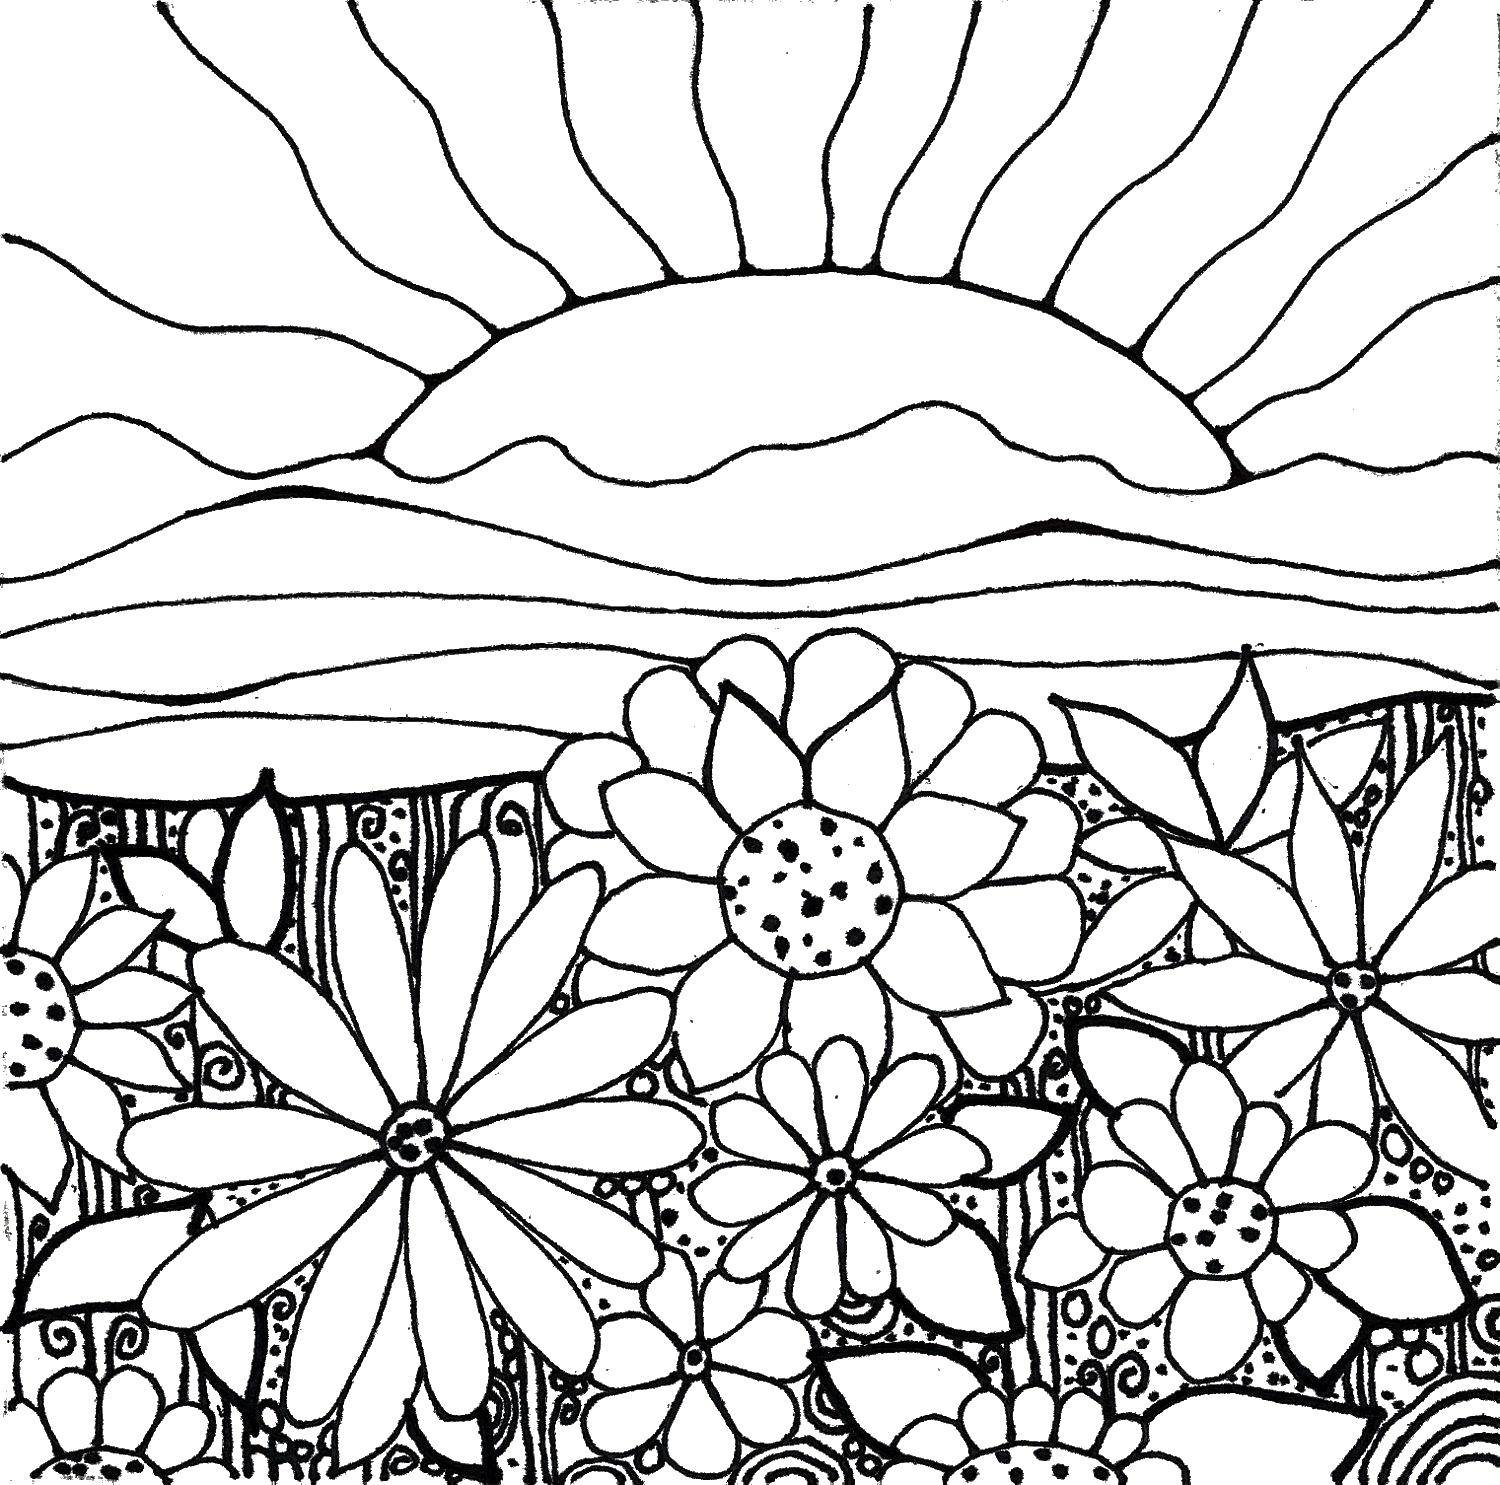 Coloring Sunset and sunflowers. Category coloring. Tags:  sunset, sun, sunflowers.